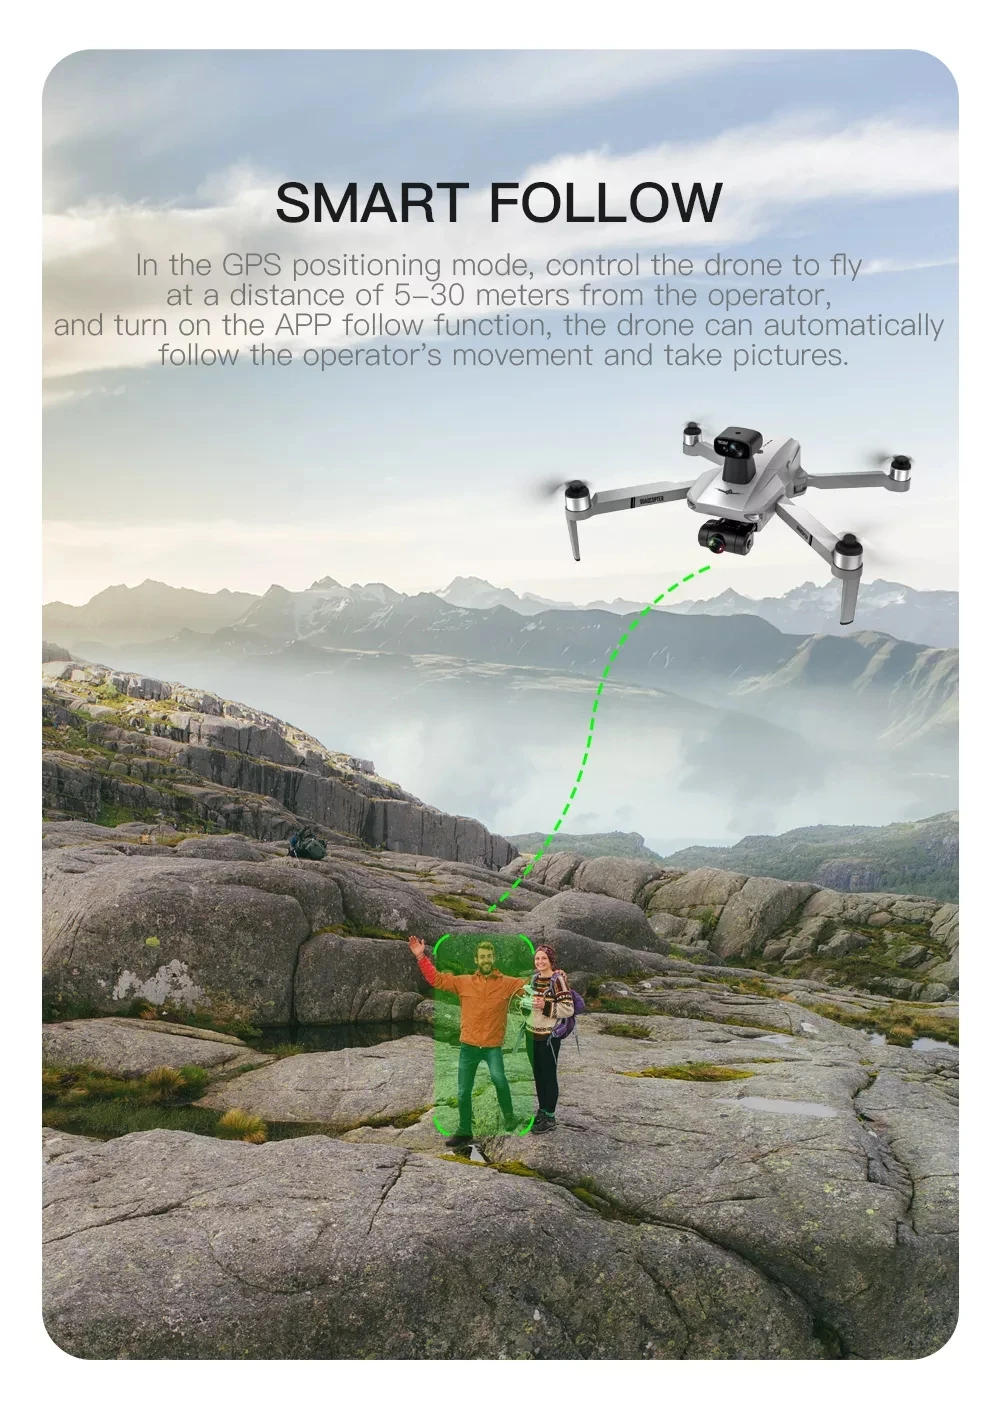 KF102 MAX Drone, SMART FOLLOW In the GPS positioning mode, control the drone to fly at 